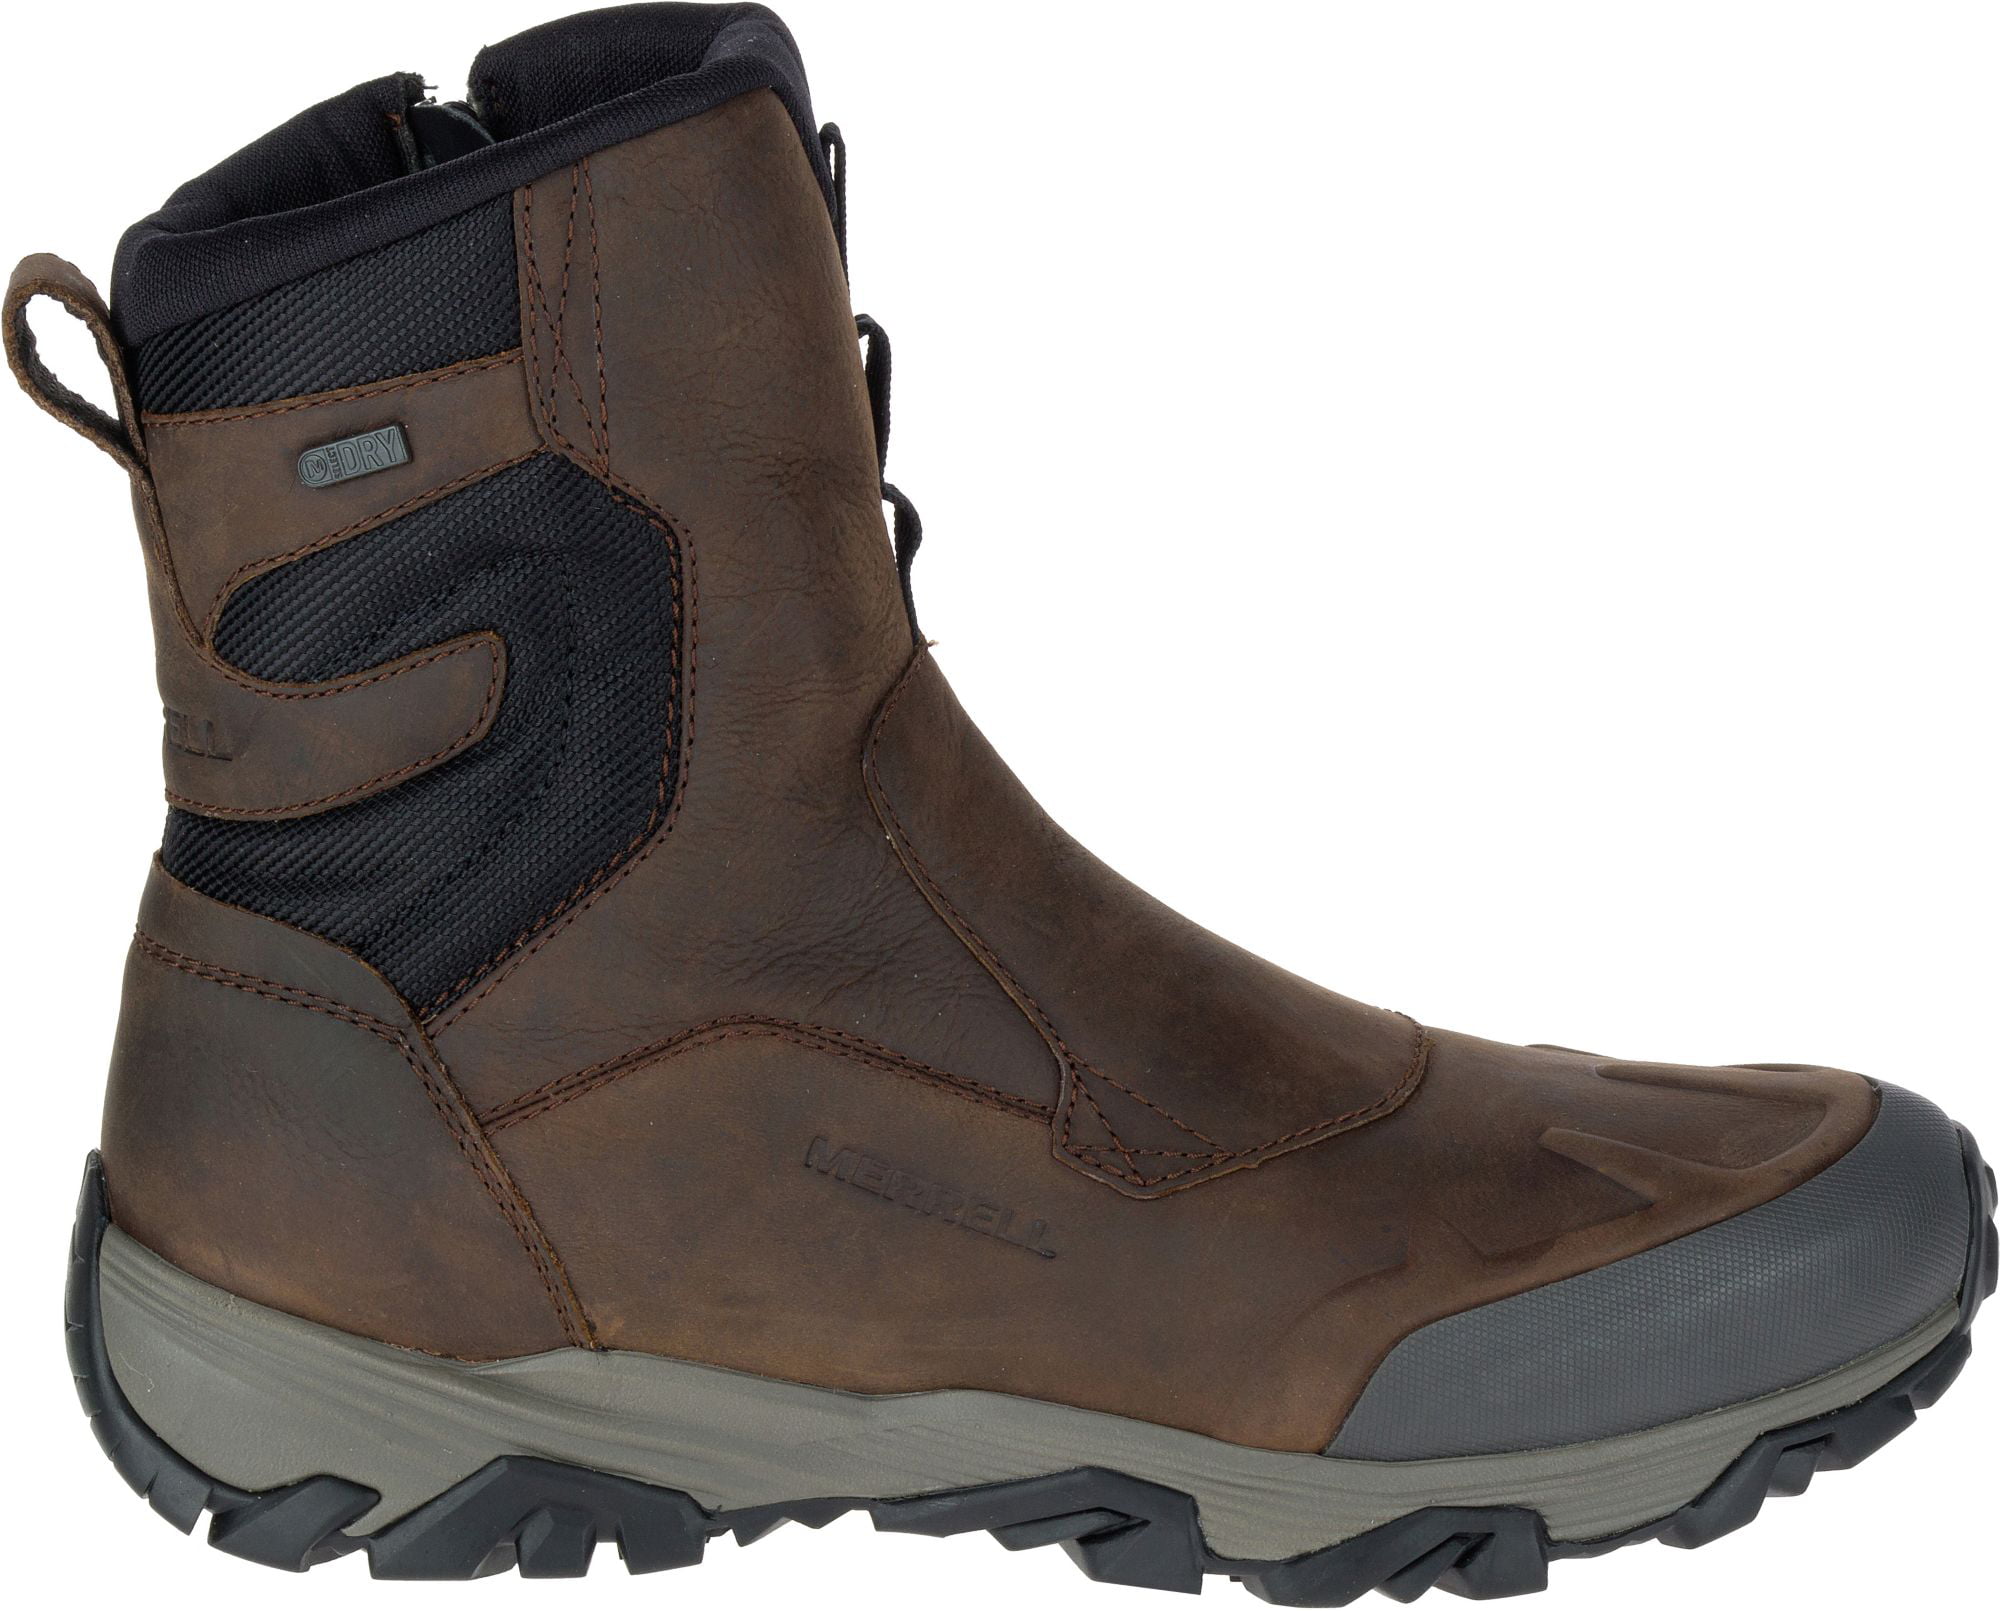 merrell all weather boots